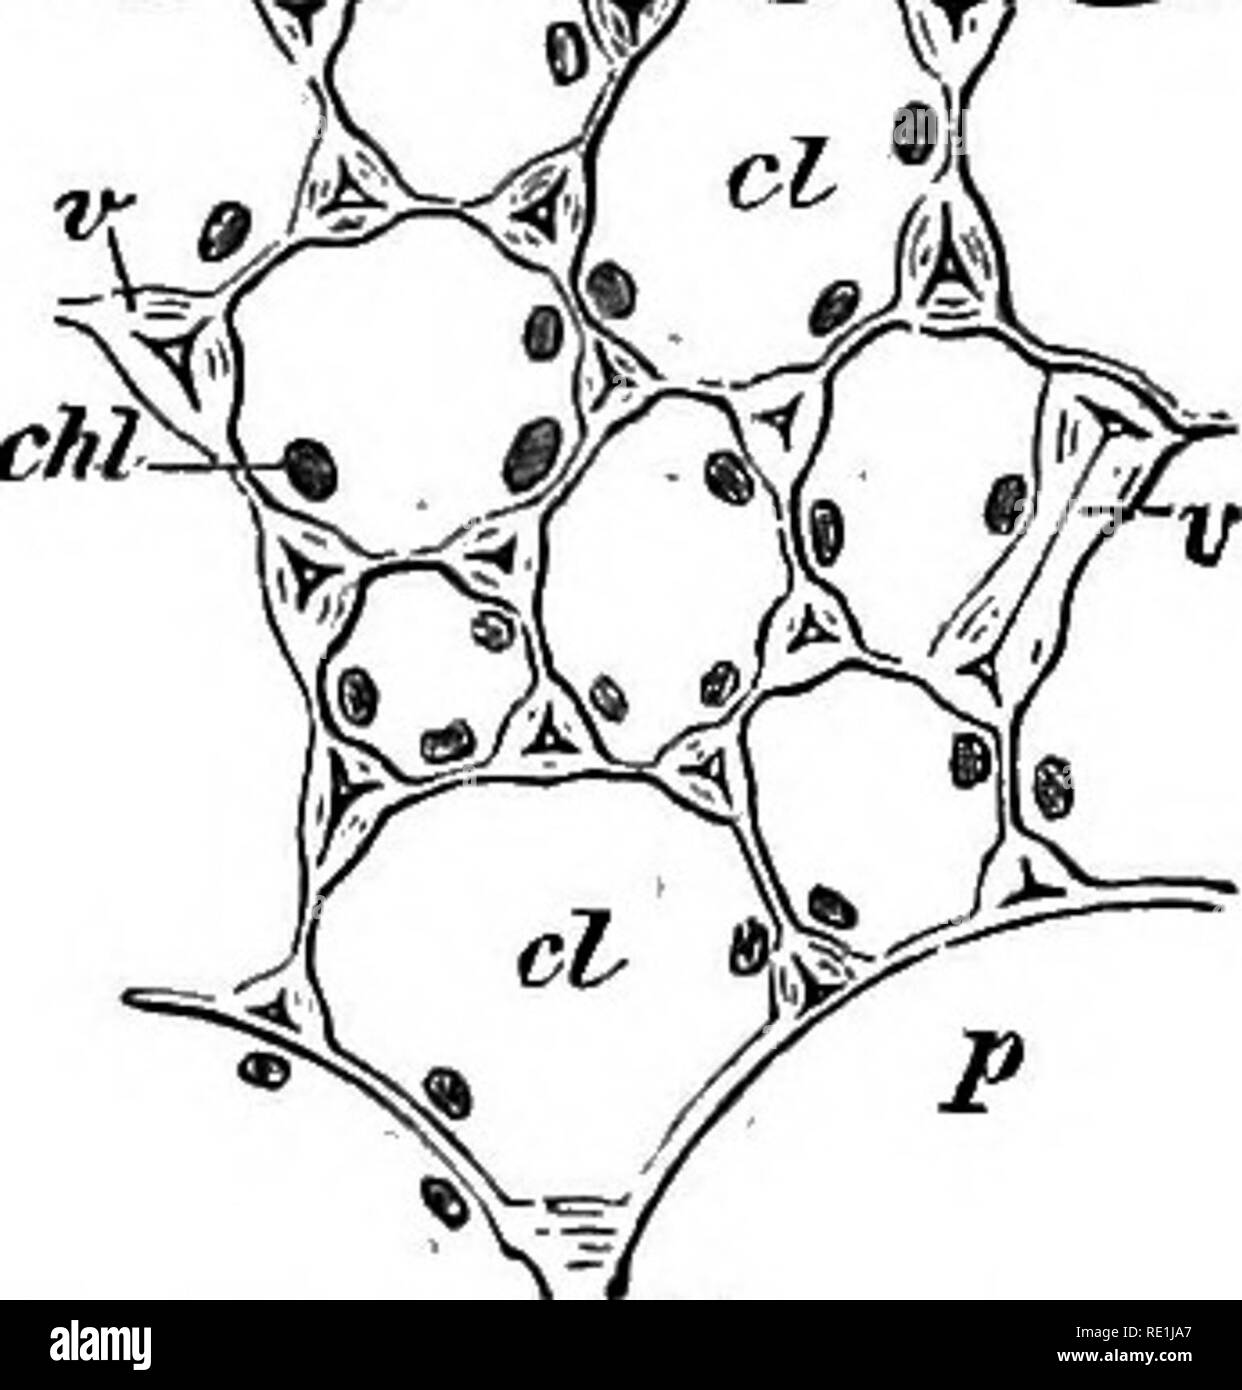 . A manual of botany. Botany. 328 MANUAL OP BOTANY Fig. 702. being known as the piliferoics layer. In the roots of Mono- cotyledons and Cryptogams the true epidermis only persists at the apex, forming as before a many-layered root-cap. The rest of the root bears a piliferous layer, but it is in these cases the external layer of the periblem. The external layer of roots is consequently not a true epi- dermis ; it is generally termed the epiblema. The cells of the dermatogen are somewhat oblong when seen in section, and are usually rich in protoplasm. As they grow older the walls become thickene Stock Photo